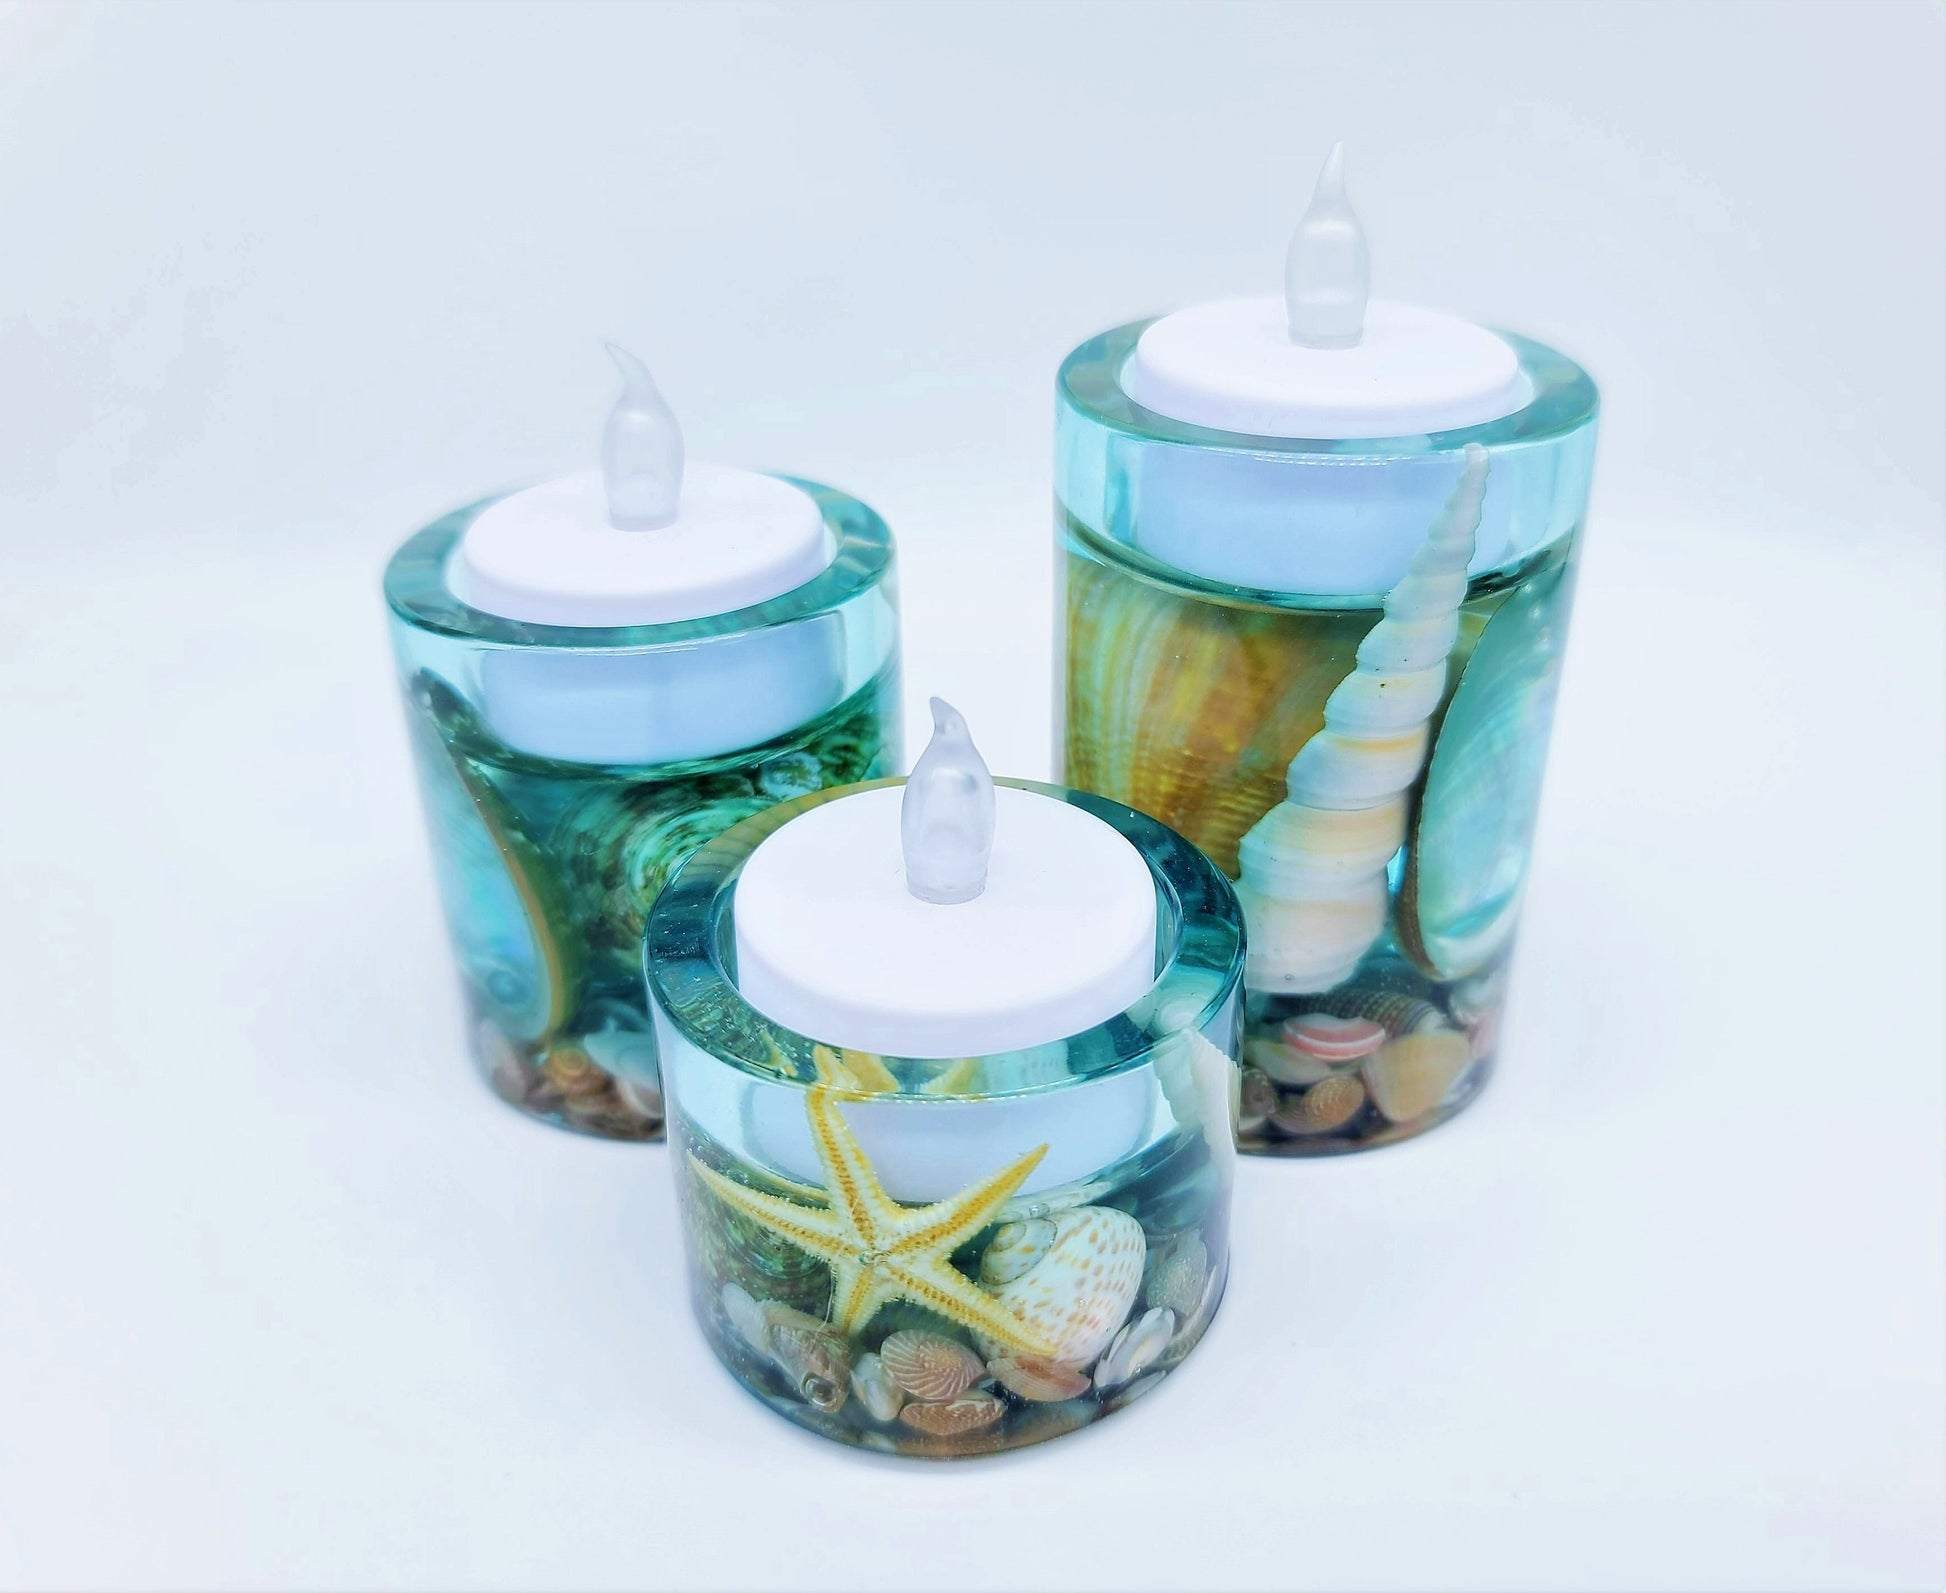 Beach Themed Round Candle Holder Made with Eco-Friendly Epoxy Resin & Seashells - Includes Choice of Real UNSCENTED Tealight or LED Tealight